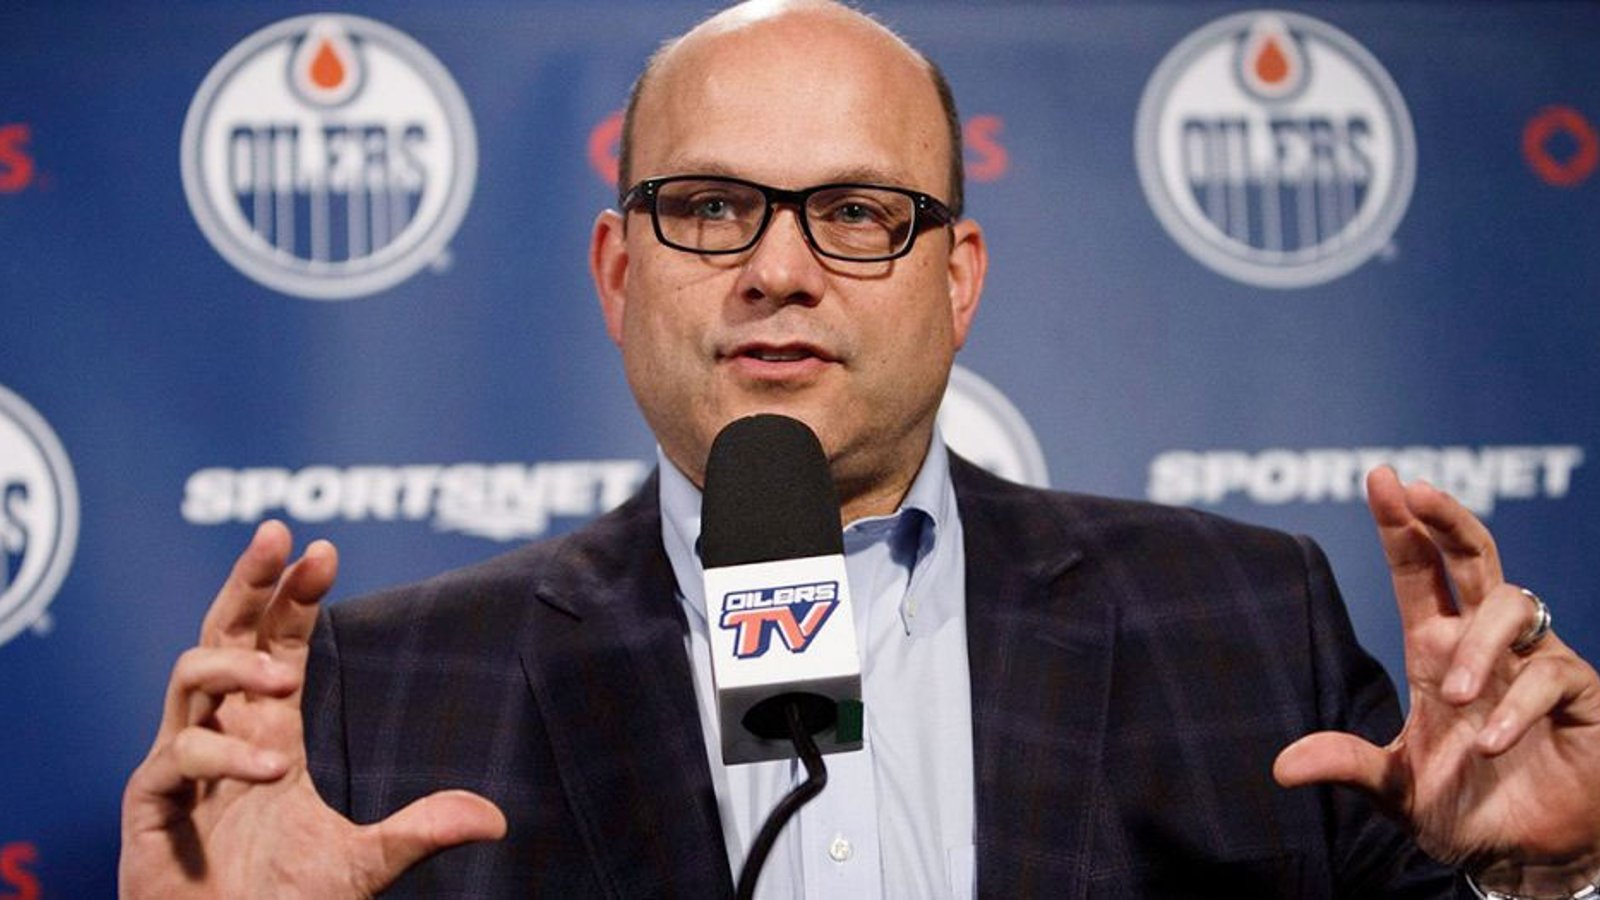 Peter Chiarelli is back in the NHL!